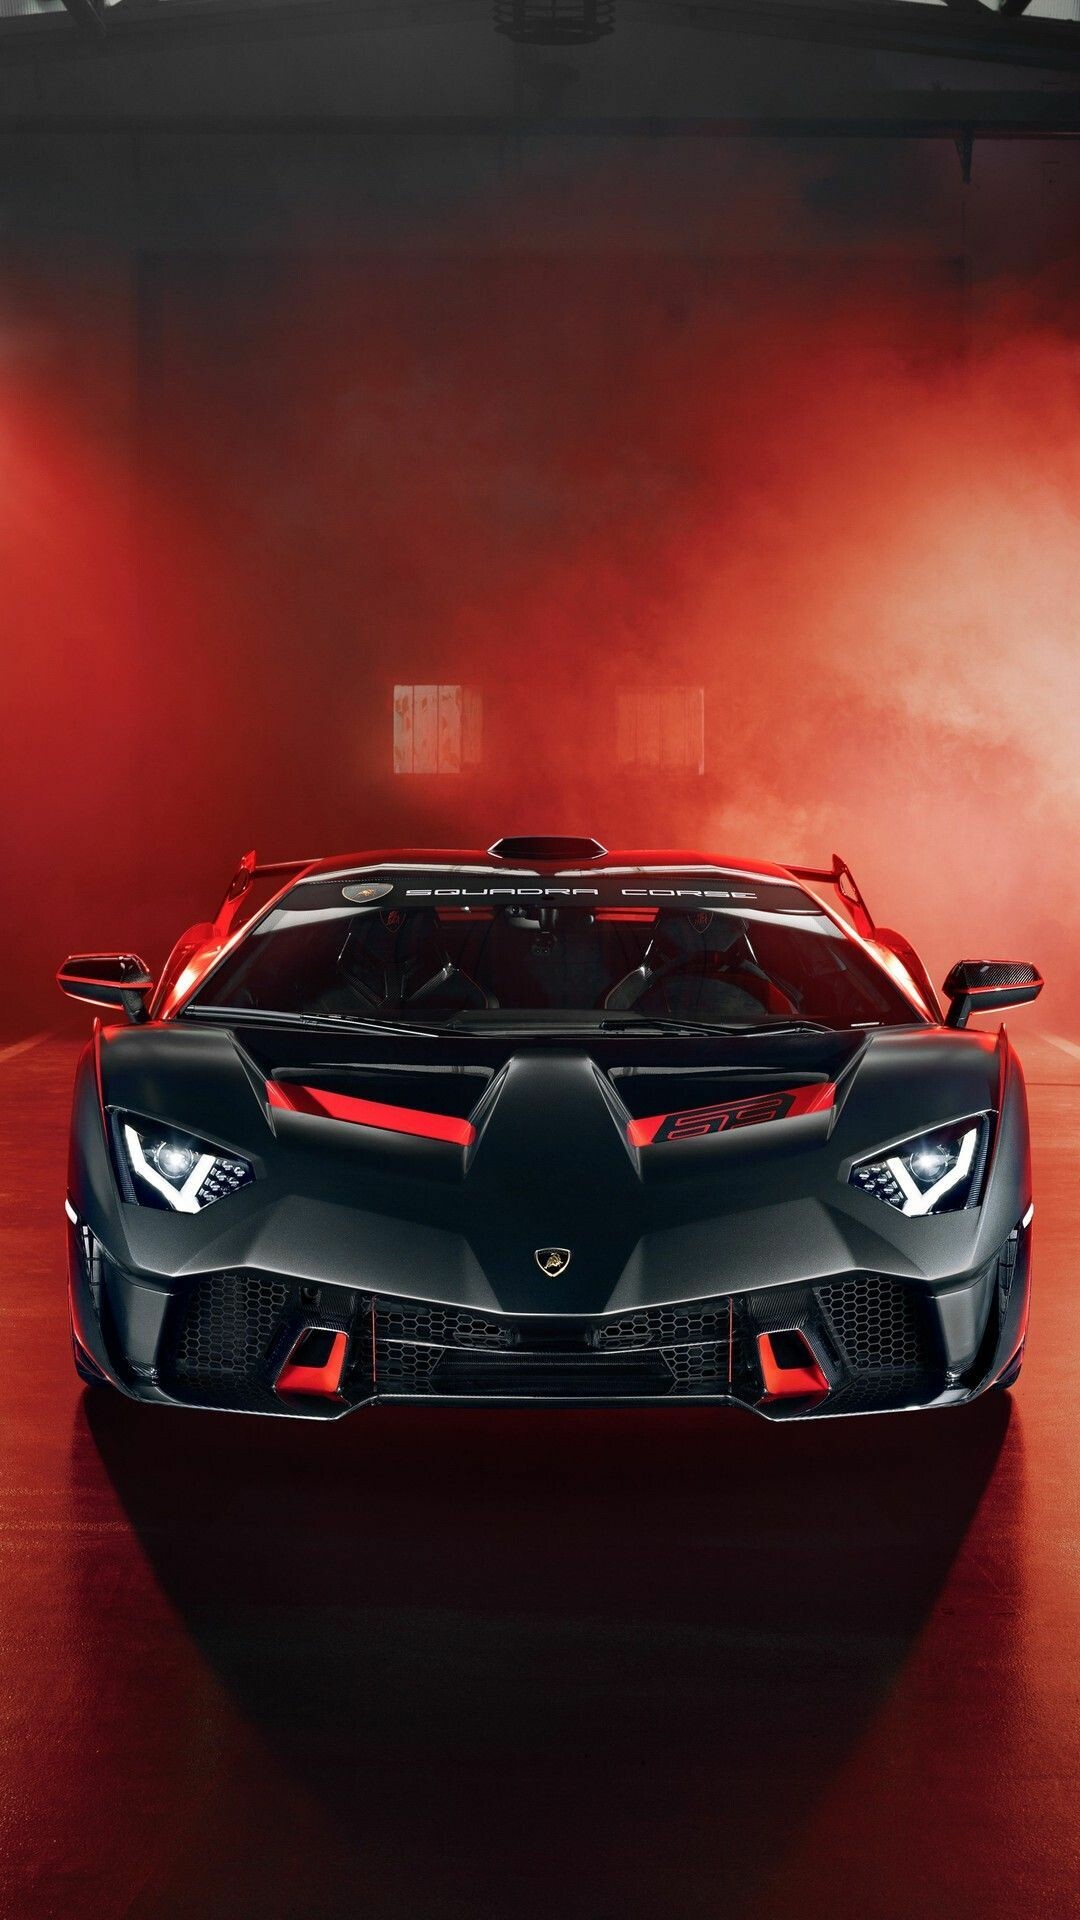 Lamborghini: The Huracan Spyder was unveiled at the 2015 Frankfurt Motor Show. 1080x1920 Full HD Background.